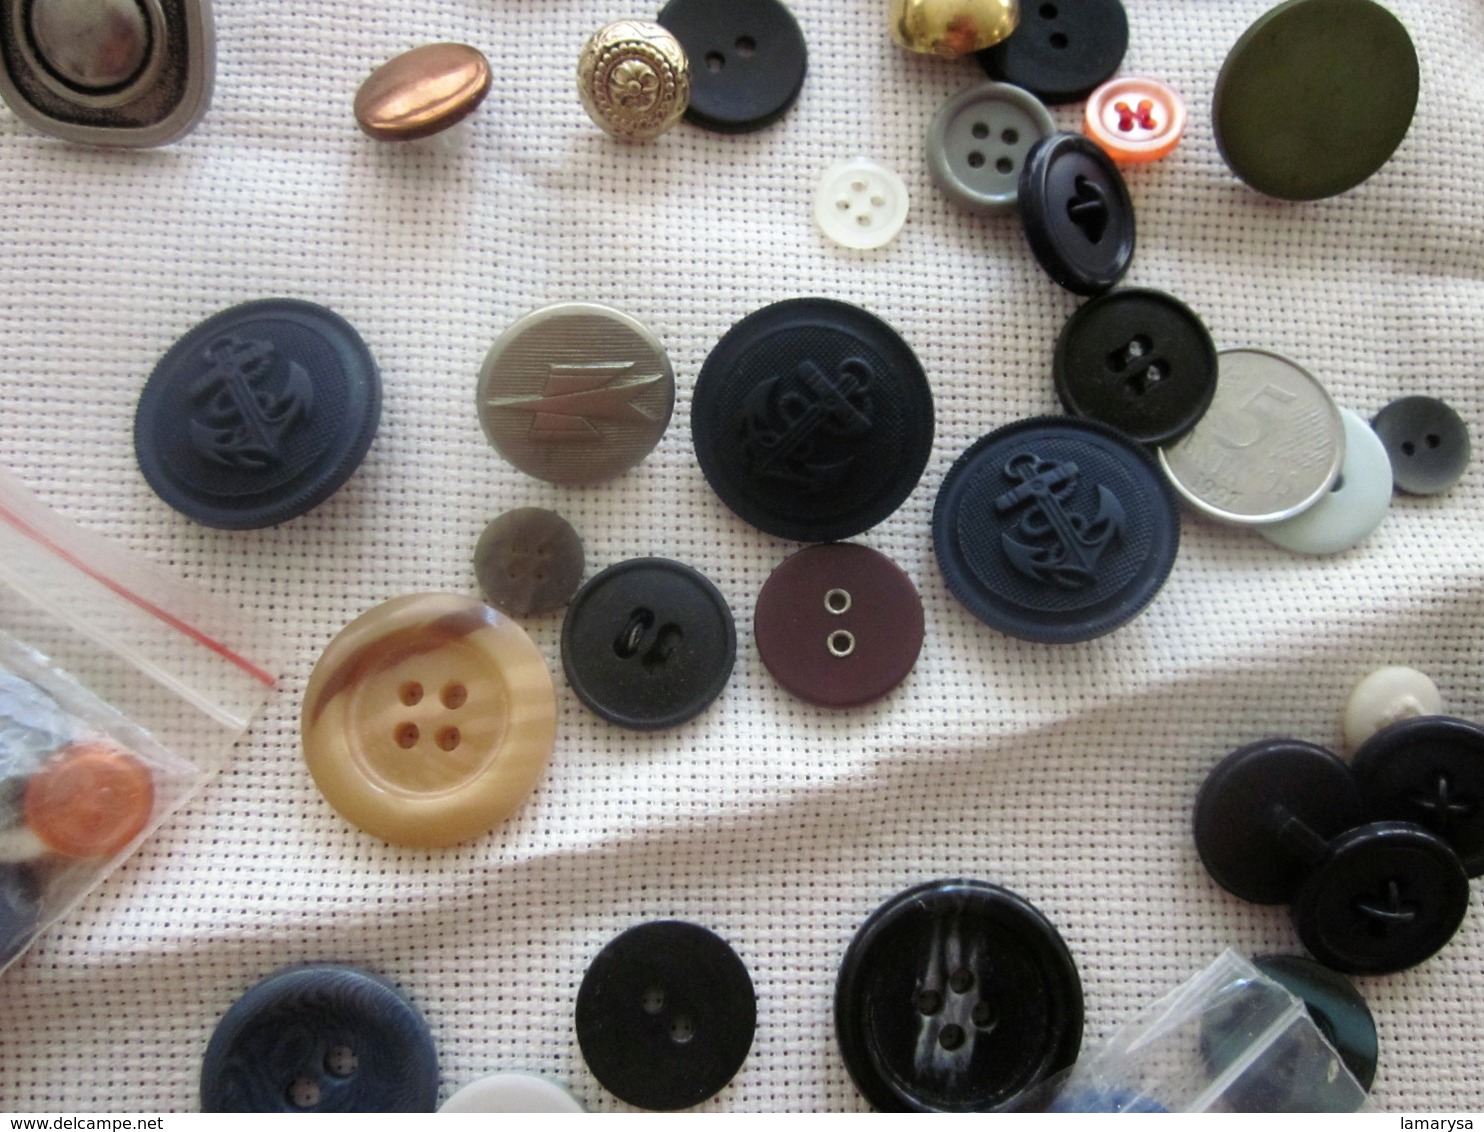 Vintage French Creative Hobbies, Rustic Canvas Embroidery Embroidery And Buttons All Kinds, All Sizes And All Colors - Bottoni Di Colletto E Gemelli